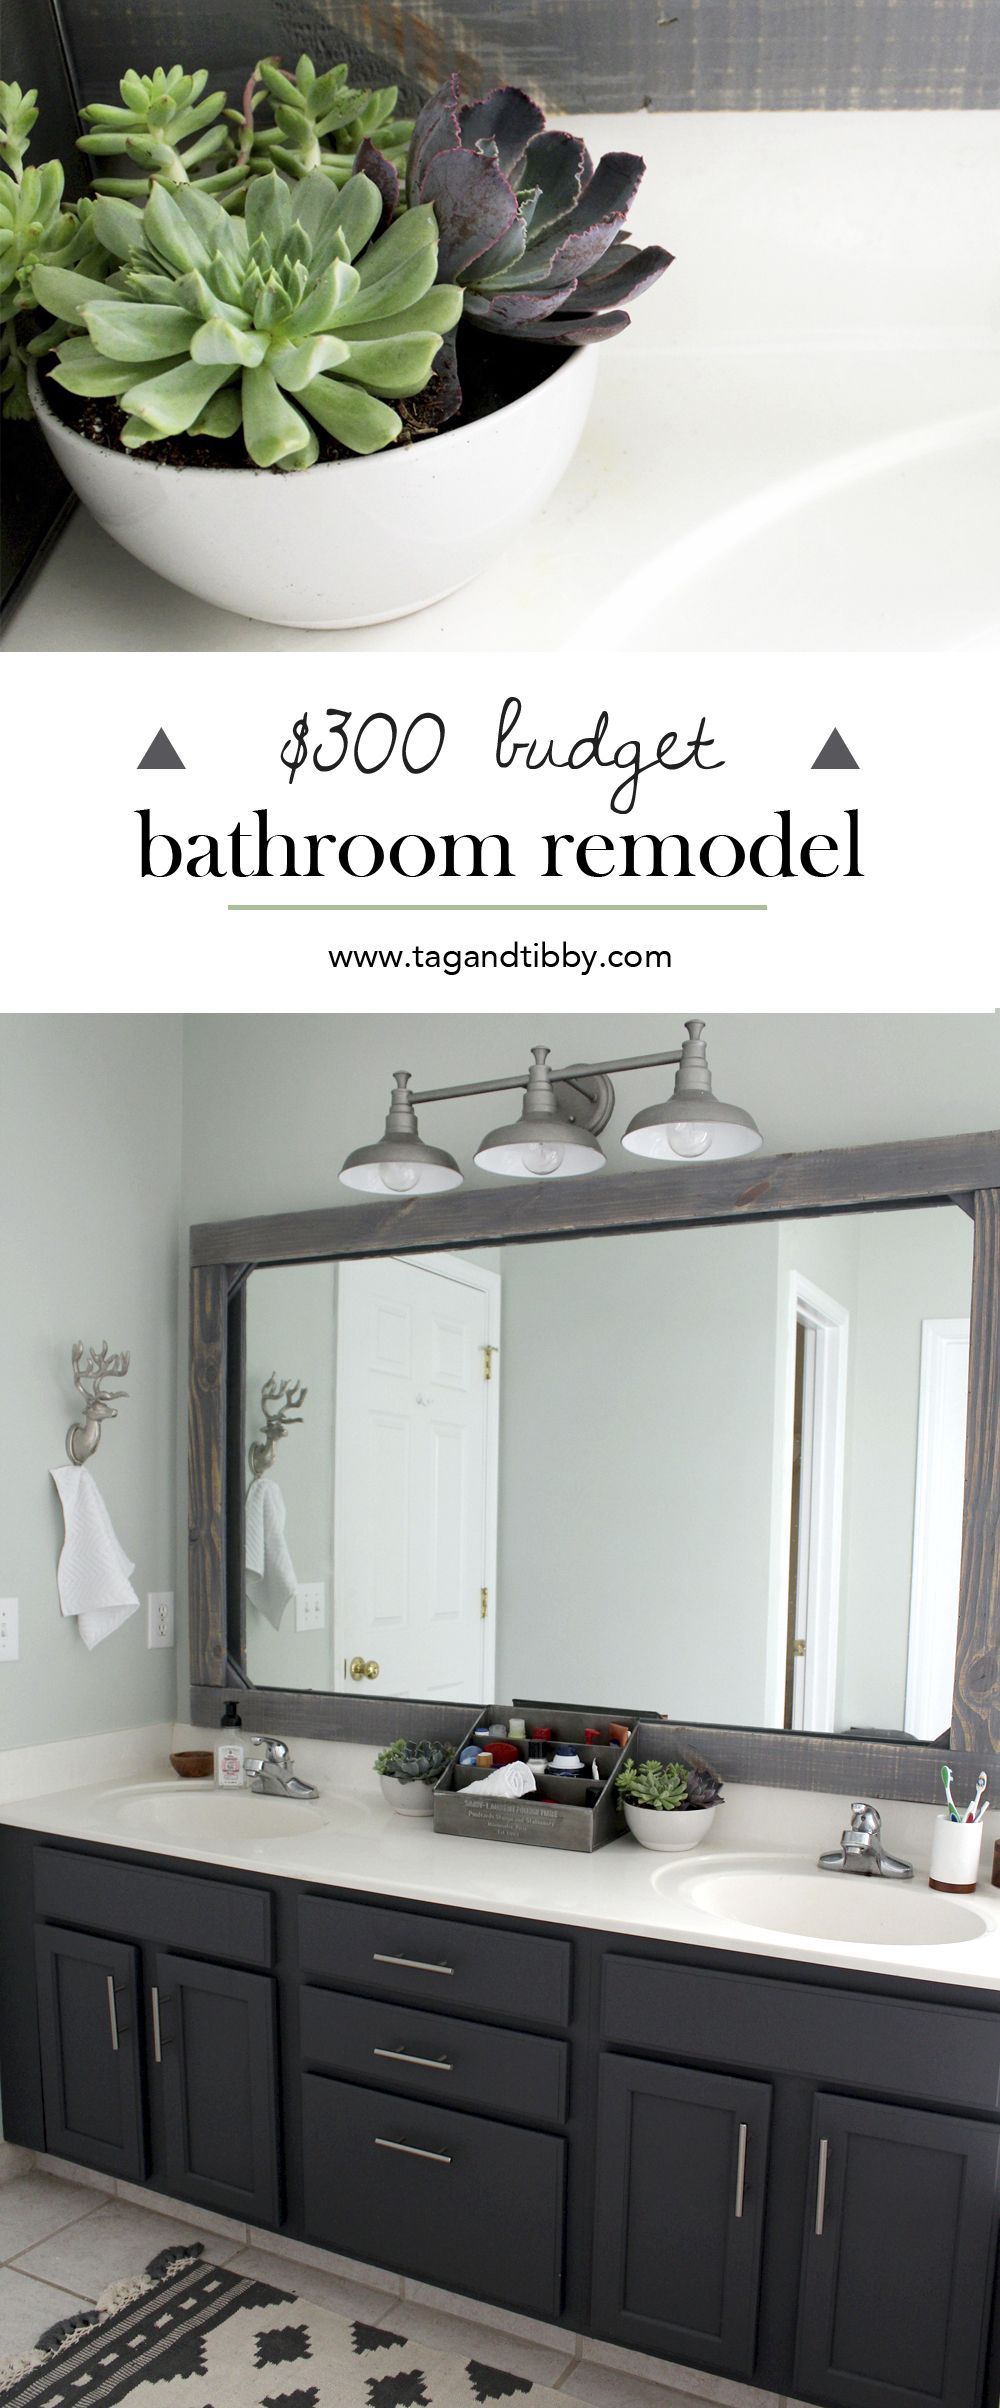 check out this mast bathroom remodel for $300! SW Sea Salt walls with SW Peppercorn cabinets